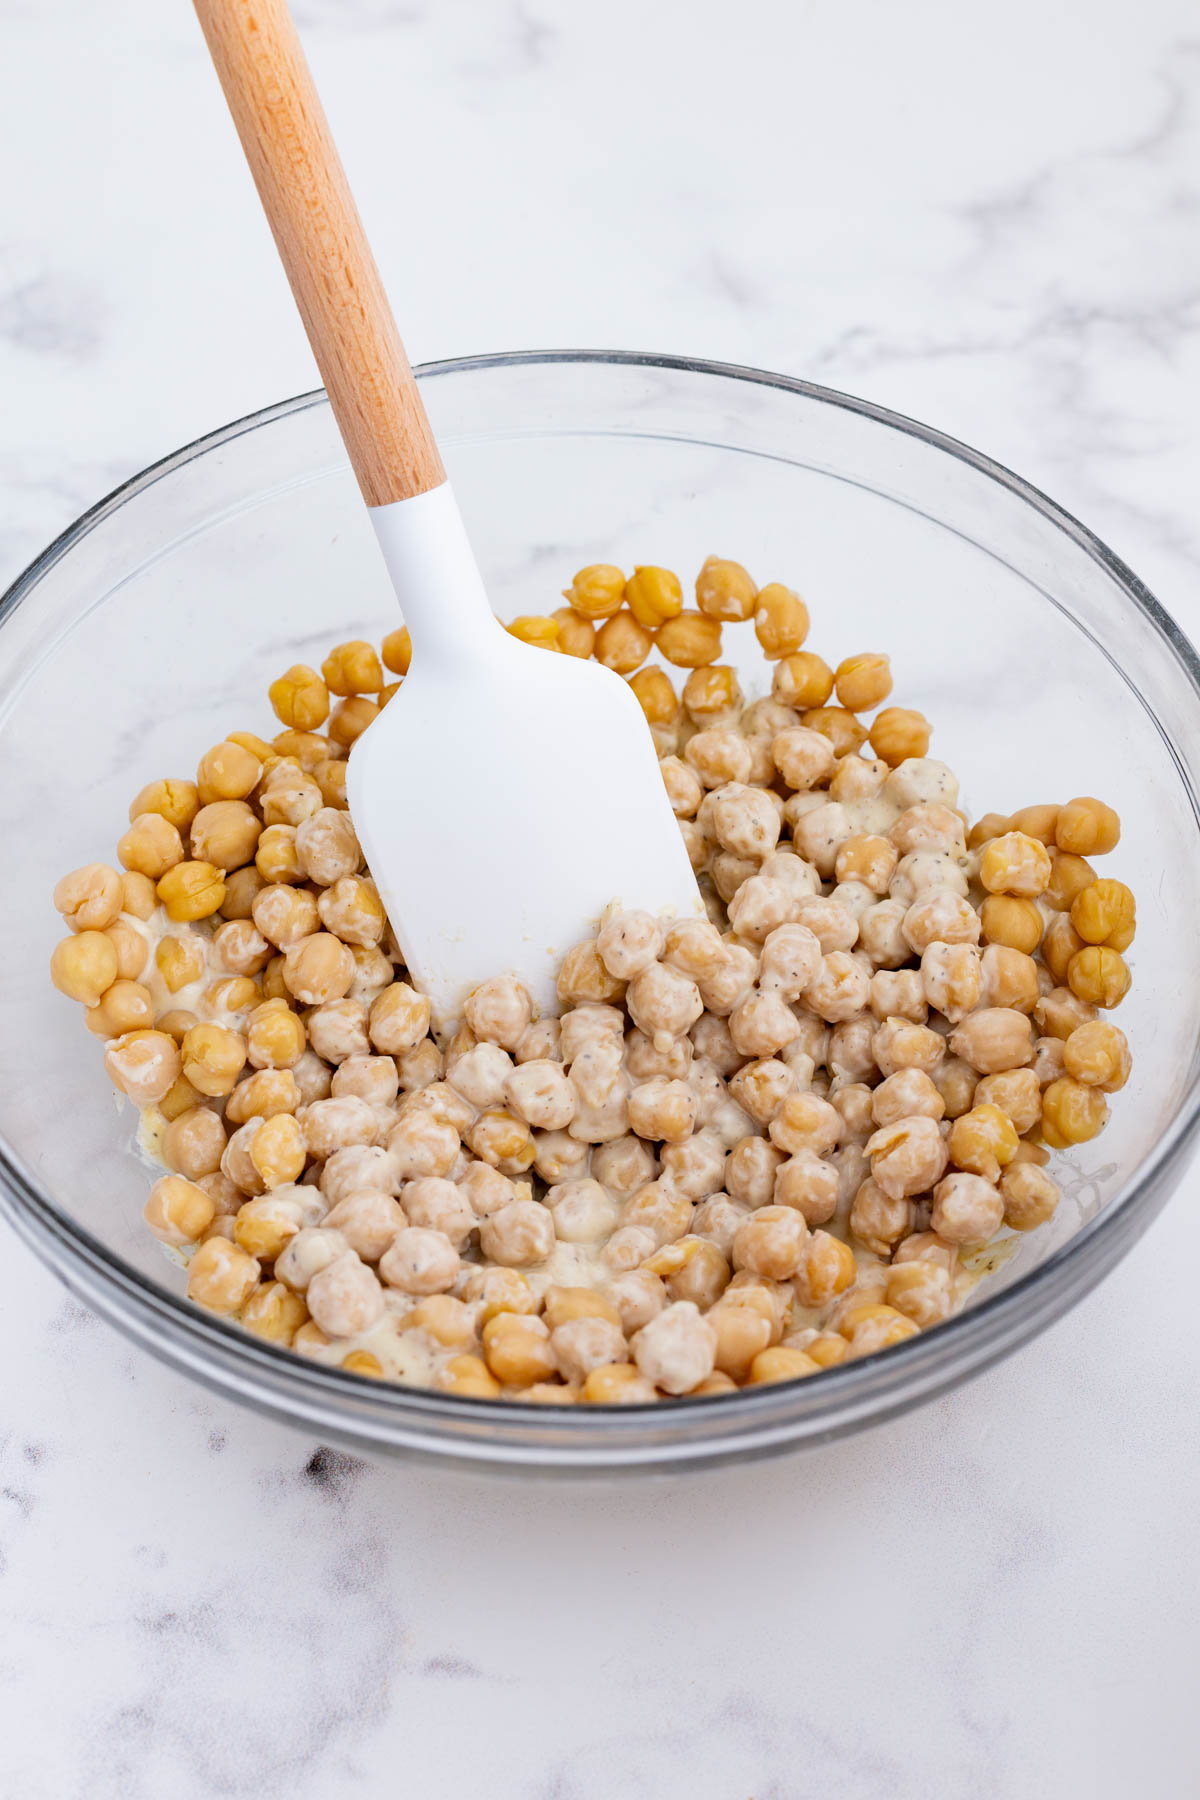 A spatula stirs the chickpeas into mayo mixture.